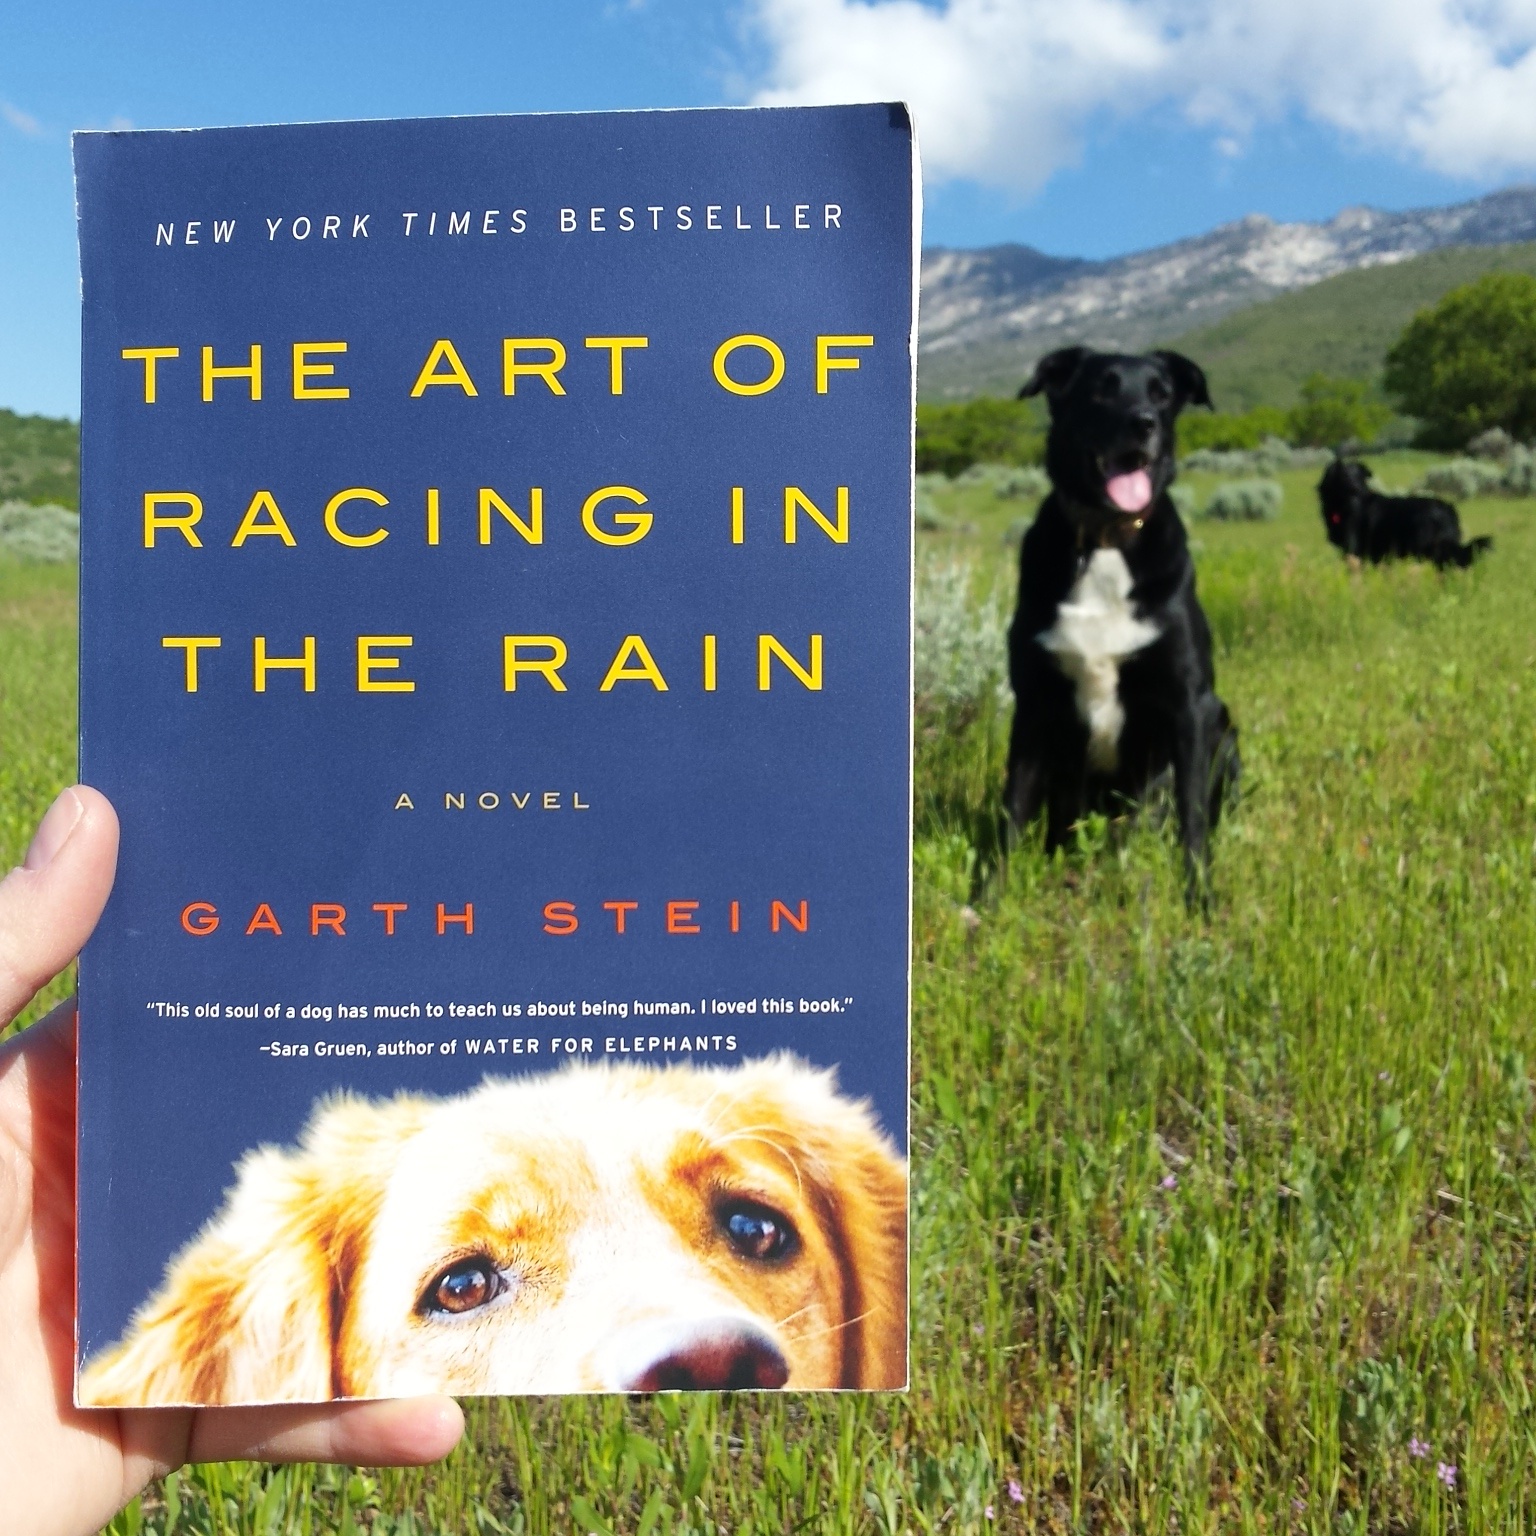 Book Review: The Art of Racing in the Rain by Garth Stein